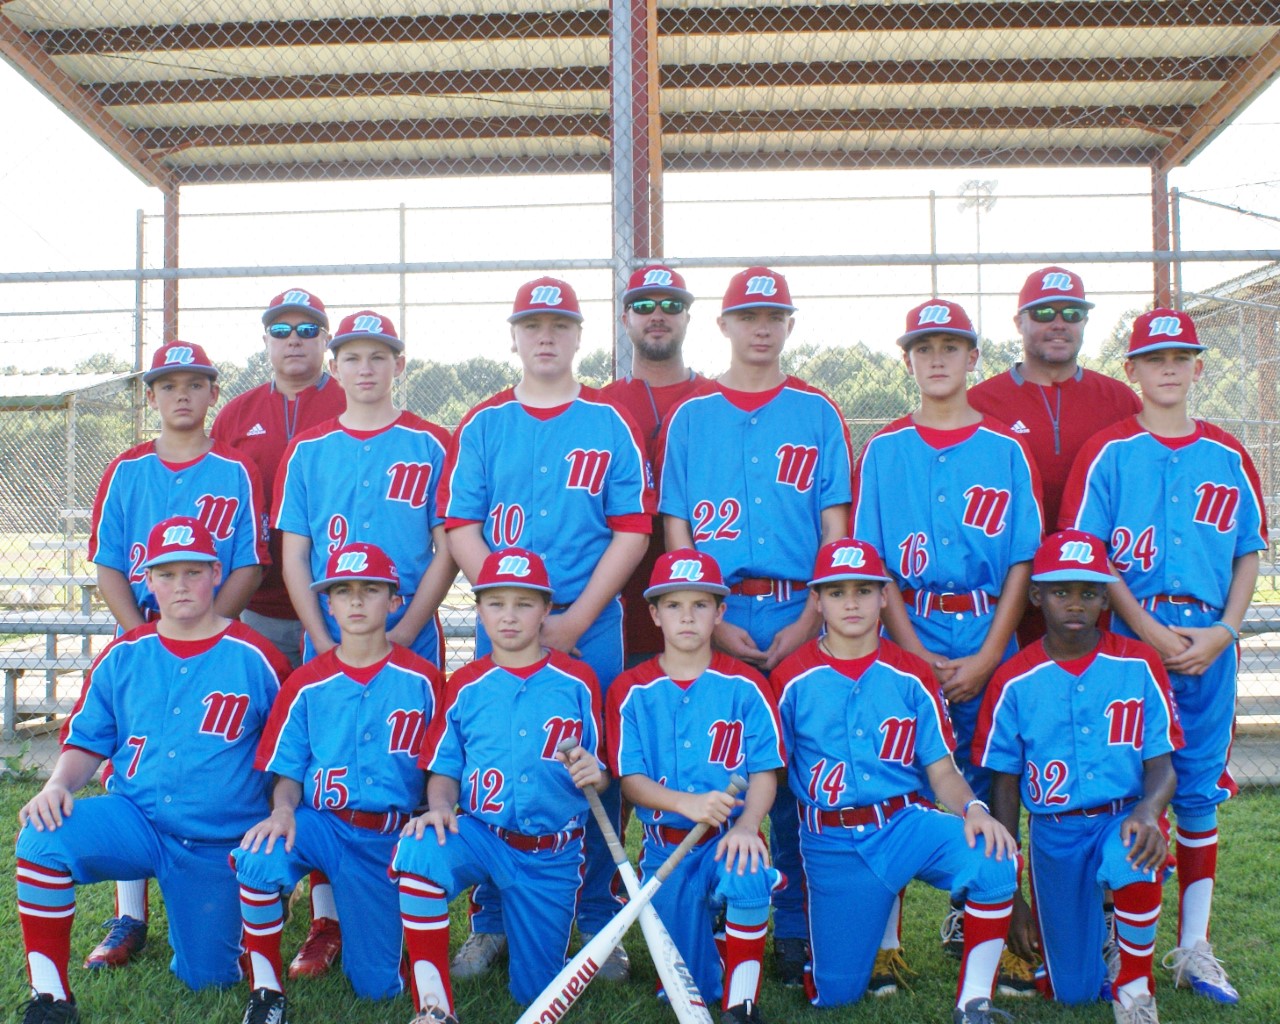 Dixie tournaments in full swing for Minden teams